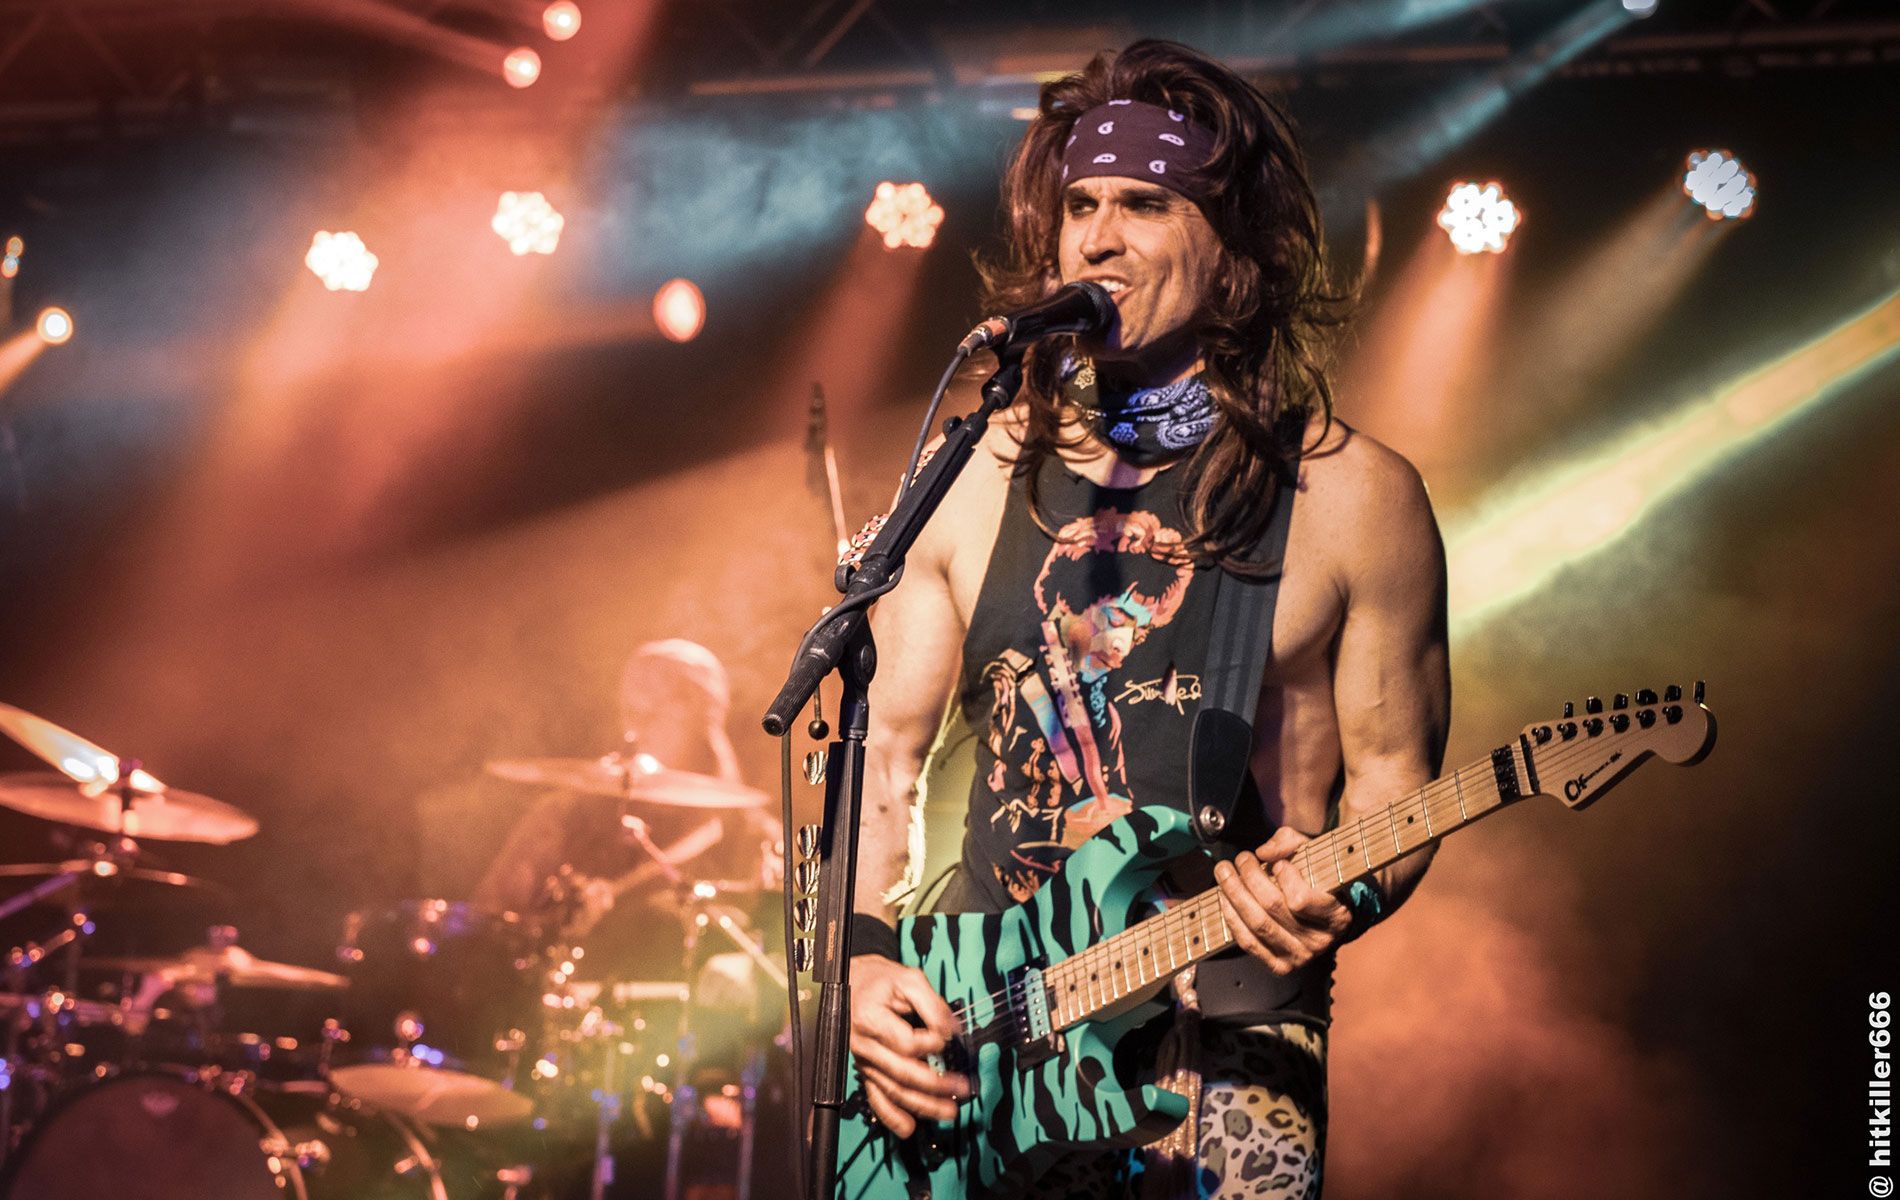 Steel-Panther-L-A-Maybe-Shakal-Today-0054.jpg